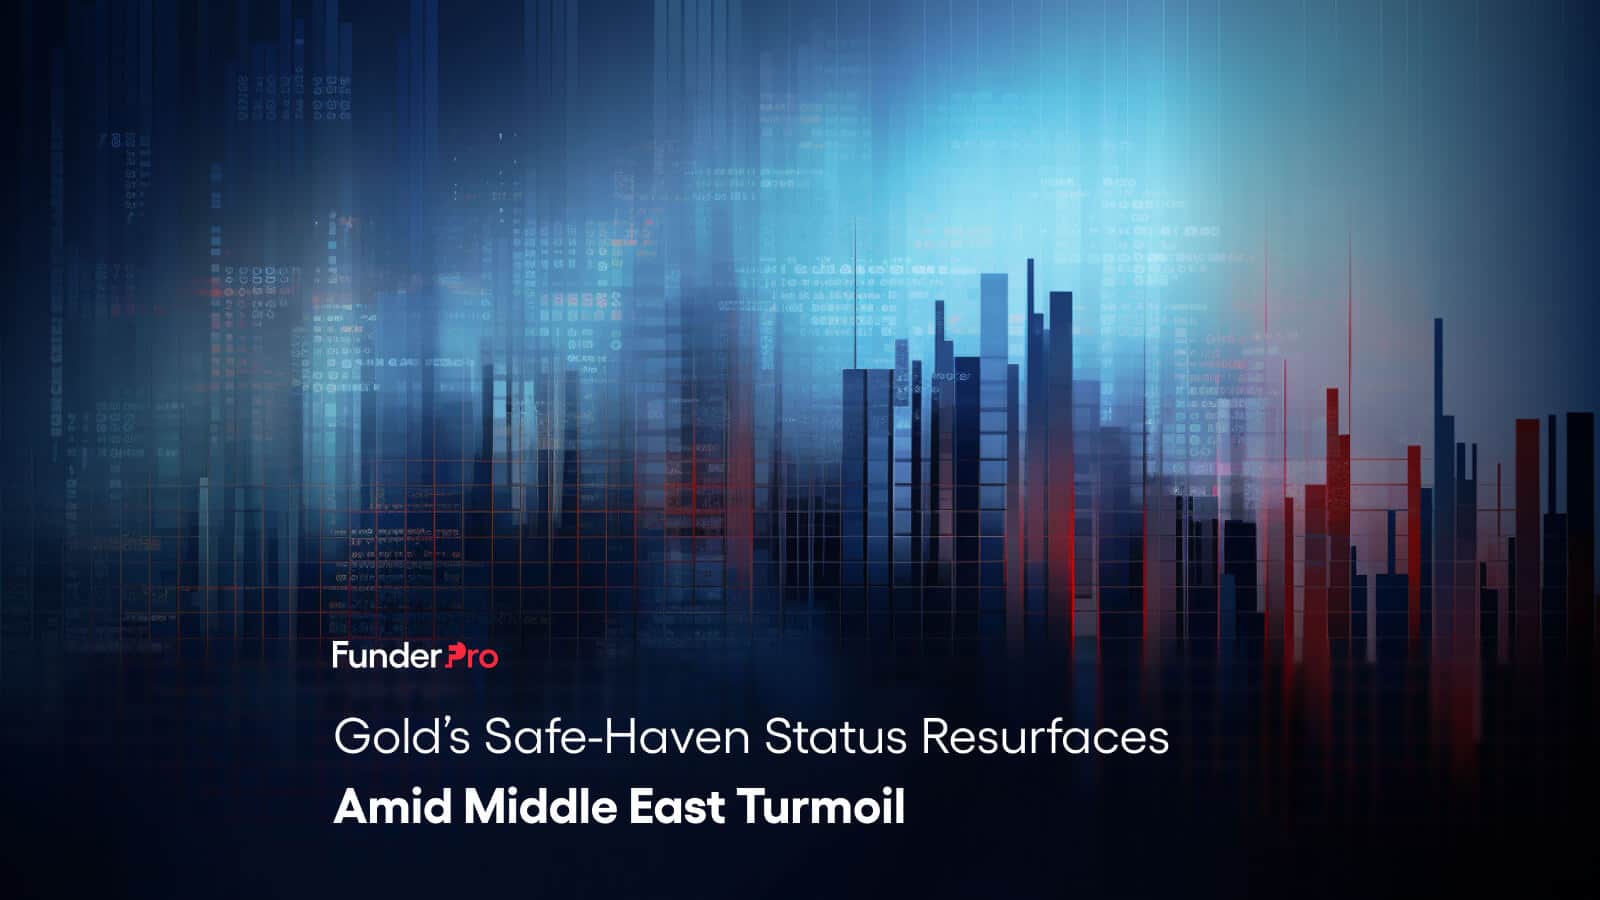 Gold’s Safe-Haven Status Resurfaces Amid Middle East Turmoil